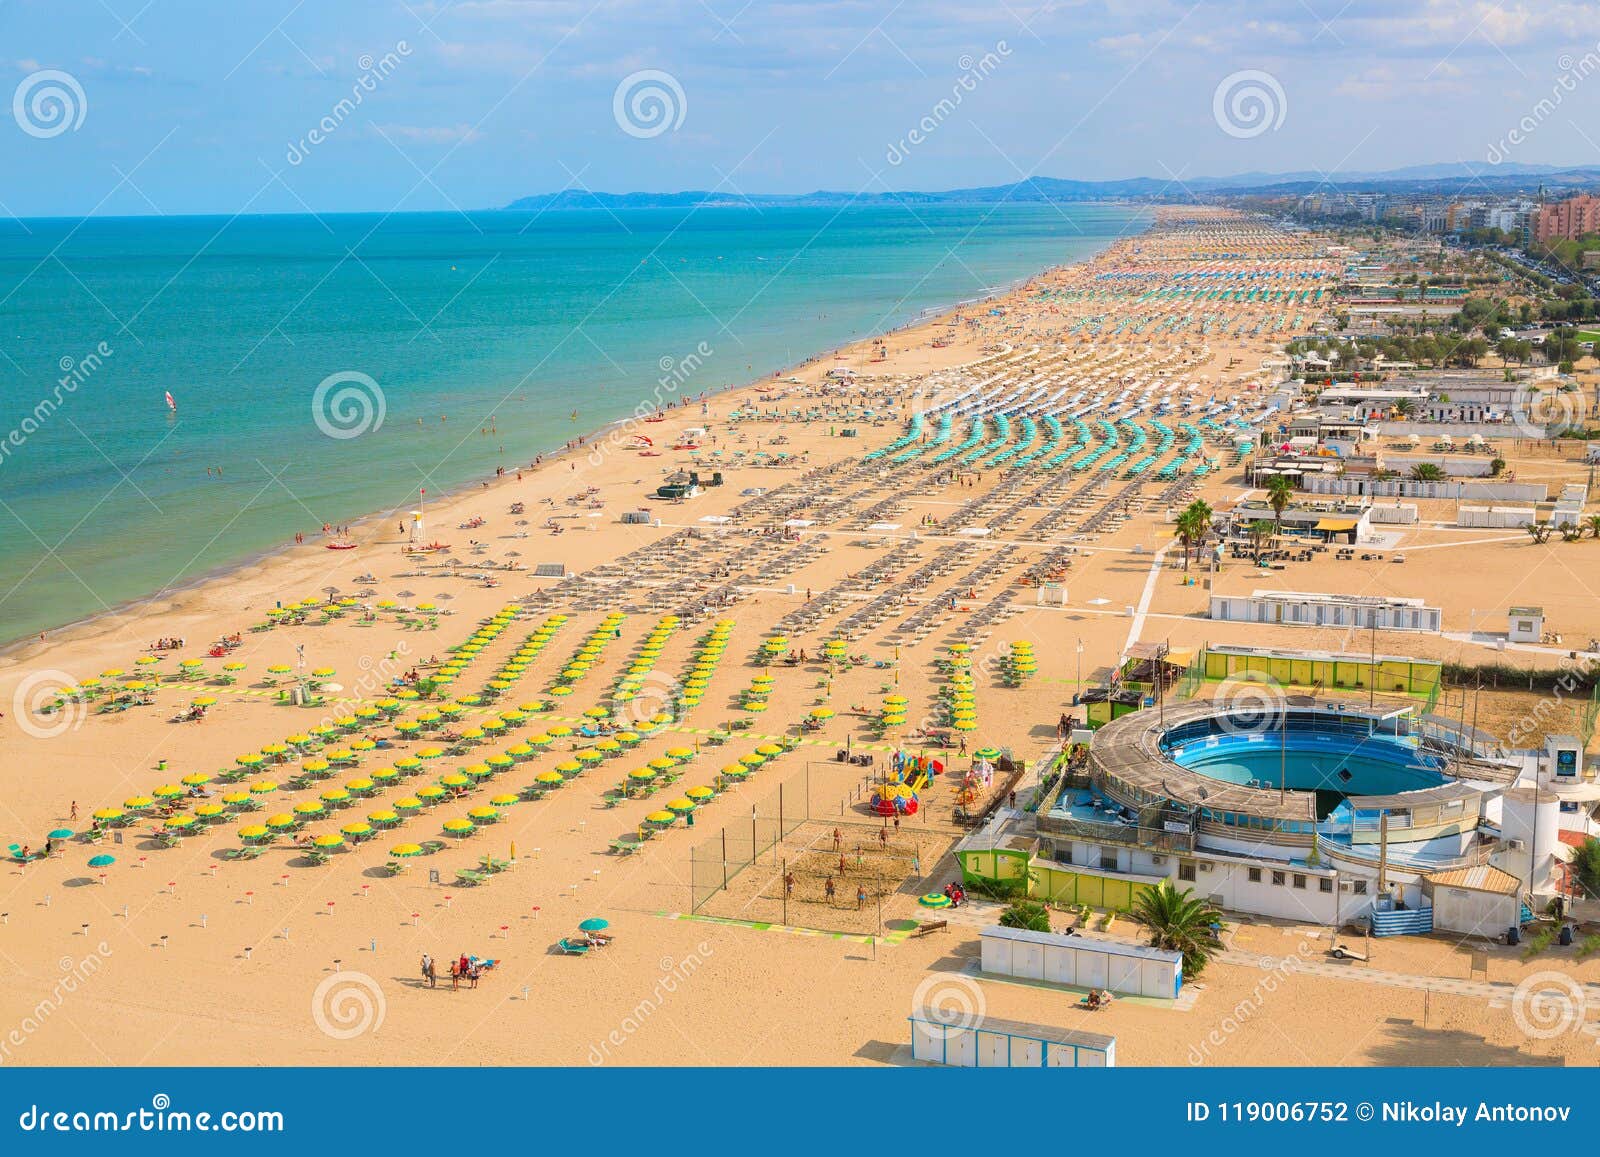 aerial view of rimini beach with people and blue water. summer vacation concept.